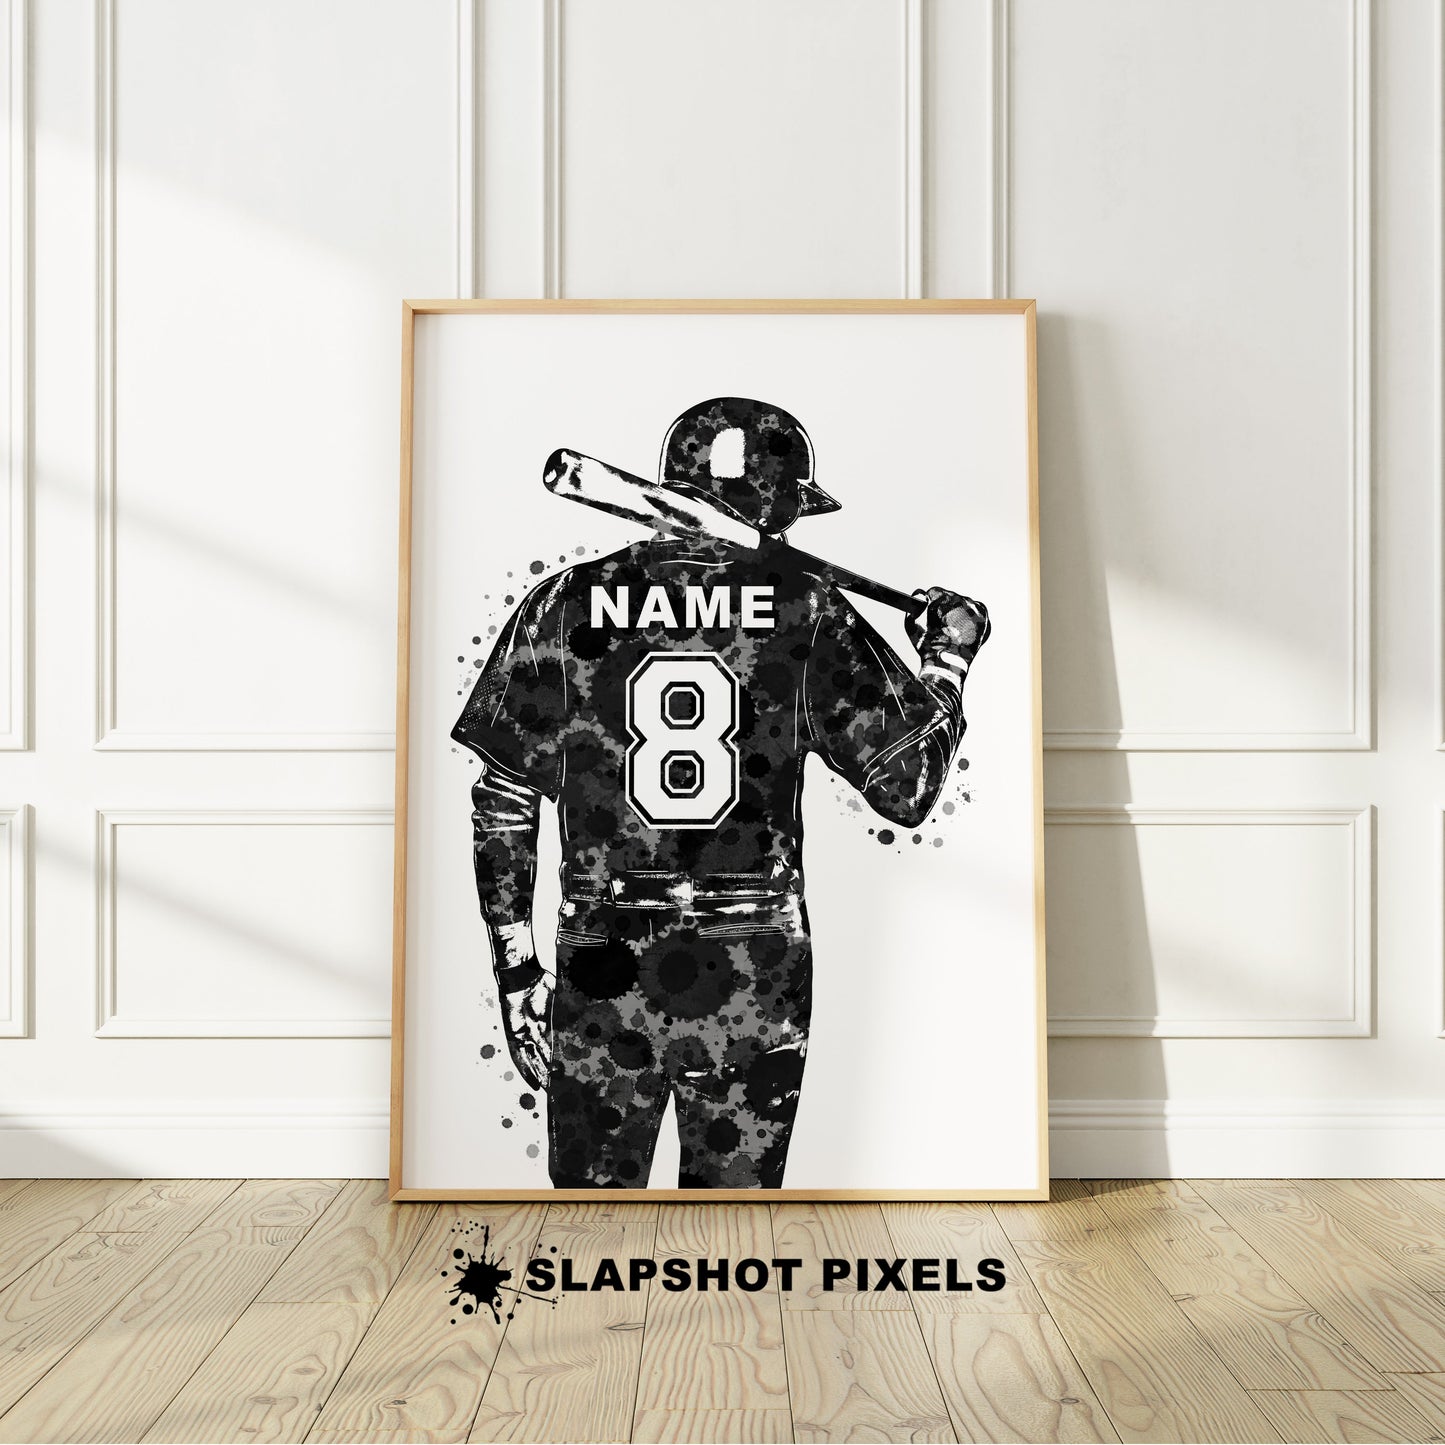 Personalized baseball poster showing back of a boy baseball player with custom name and number on the baseball jersey. Designed in watercolor splatters. Perfect baseball gifts for boys, baseball prints, baseball team gifts, baseball coach gift, baseball wall art décor in a baseball bedroom and birthday gifts for baseball players.